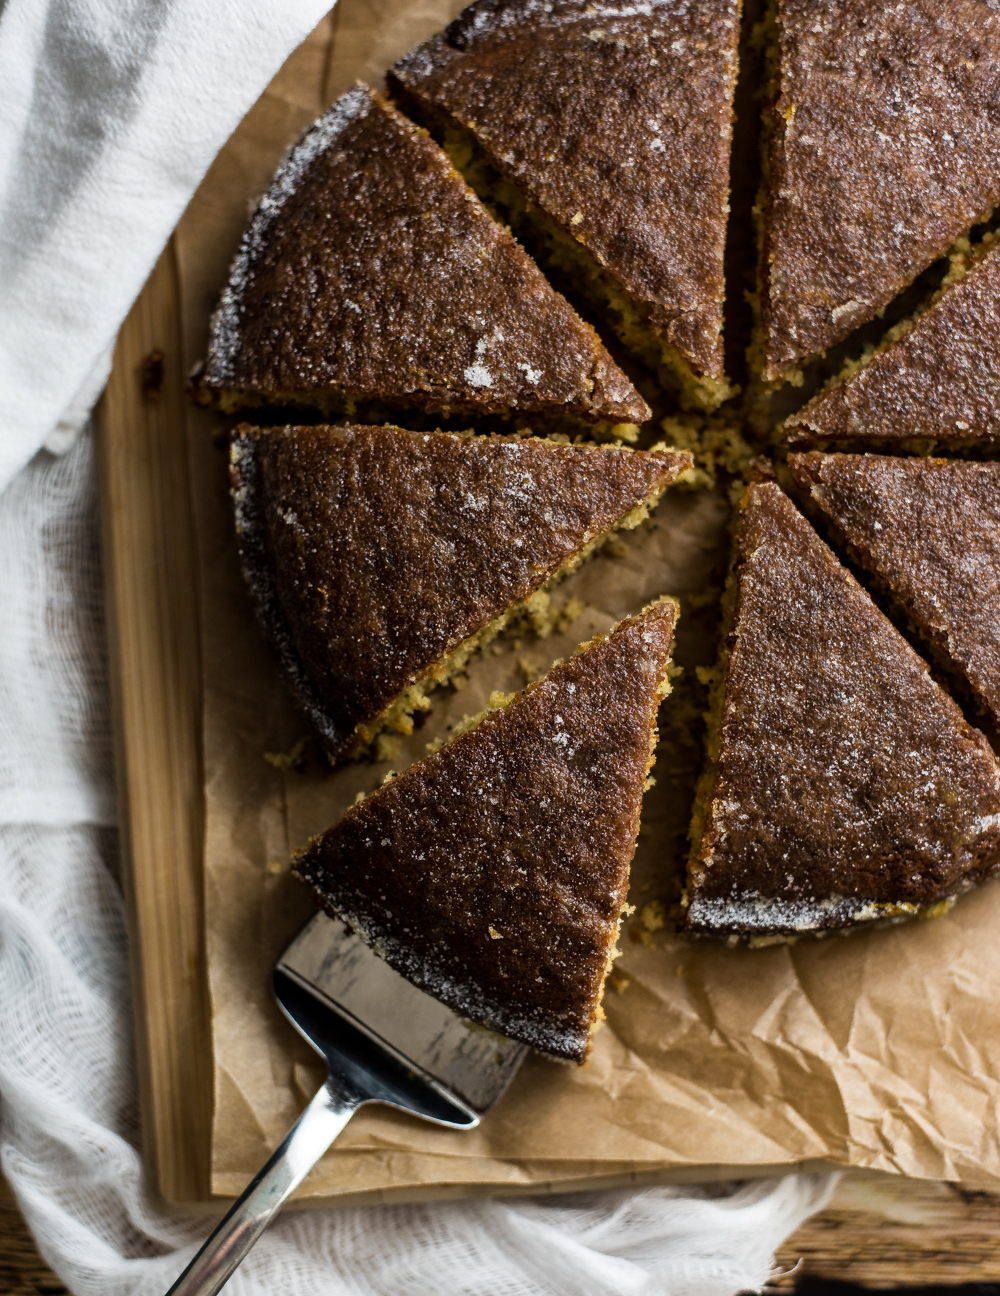 Citrus crunch cake is the perfect autumn dessert. It resembles coffee cake, but has the most amazing sugared crunchy topping!